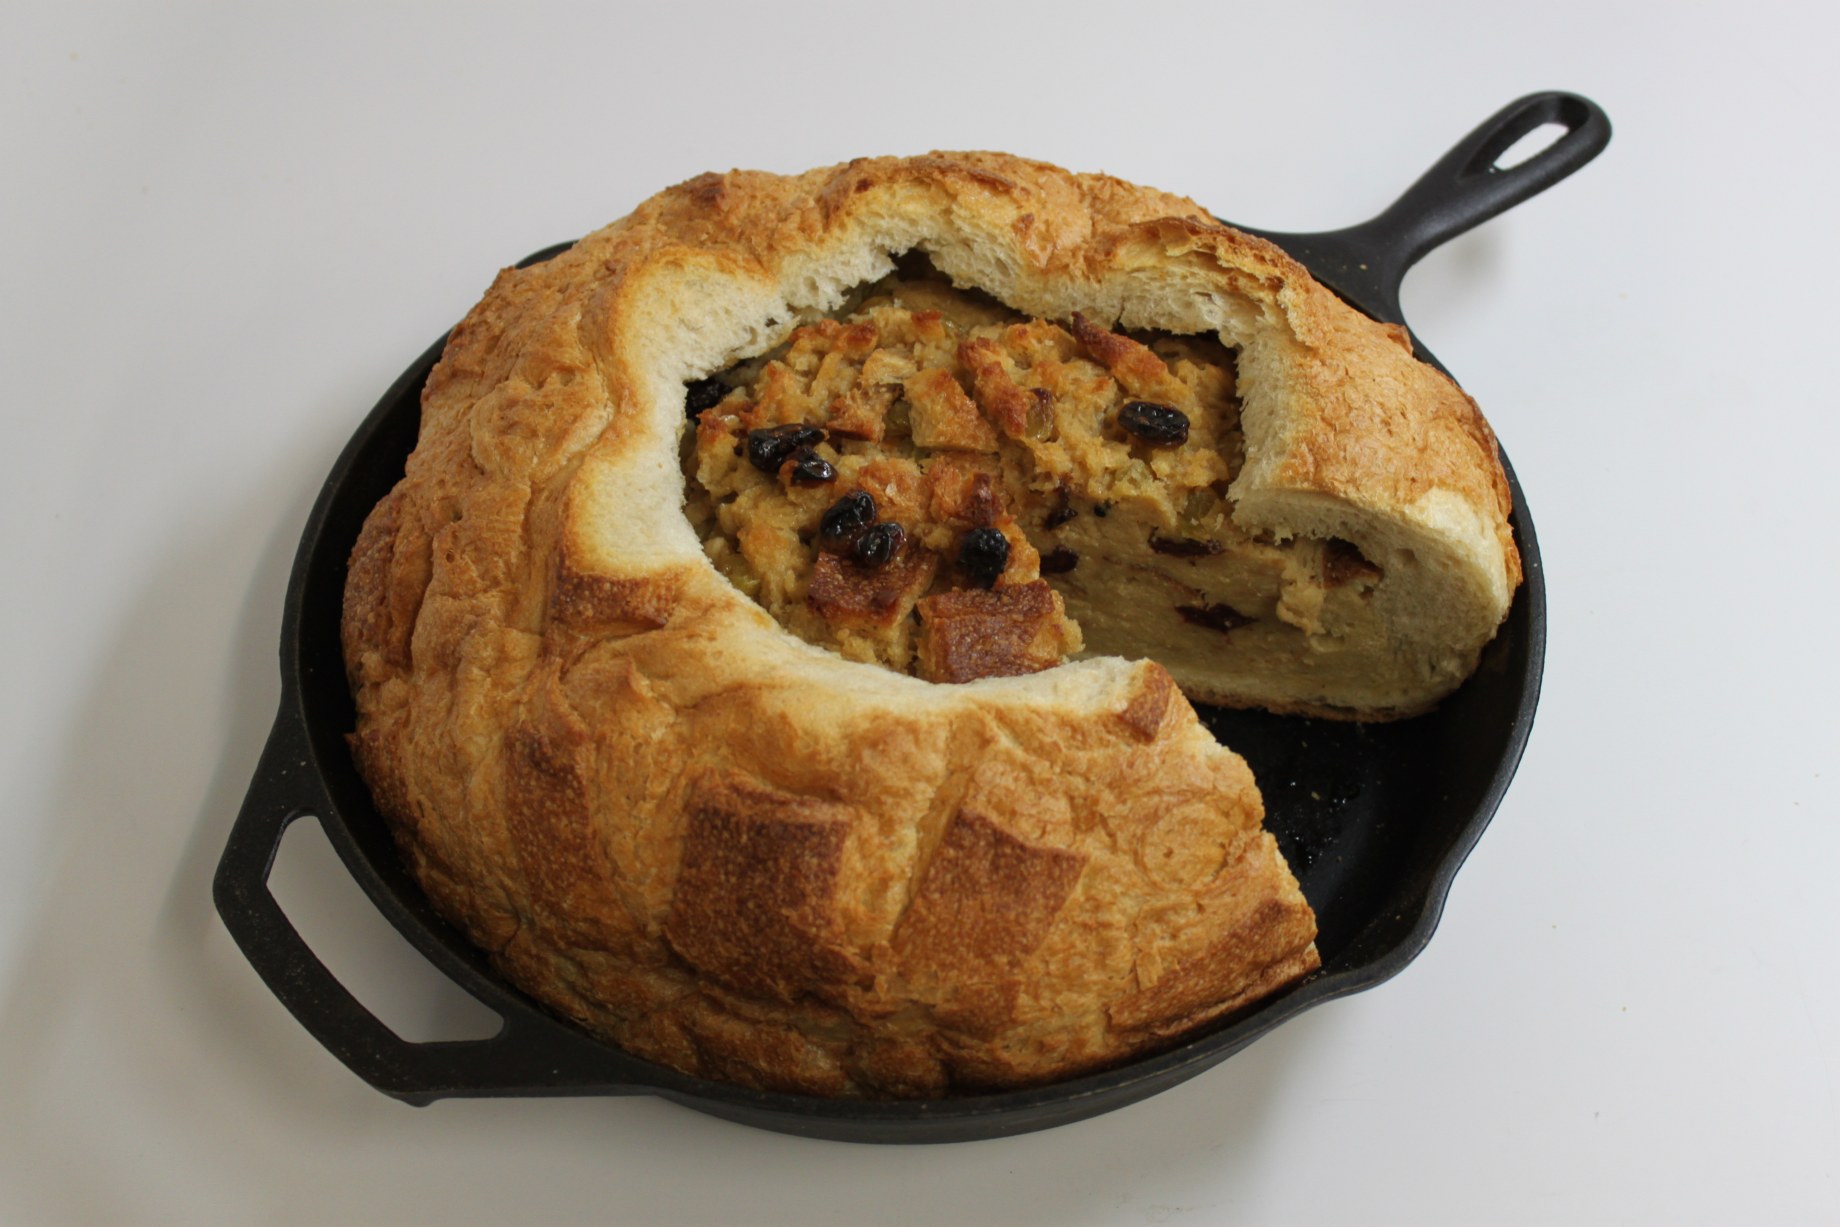 Spiced bread pudding in a cast-iron skillet on the set of Good Eats.